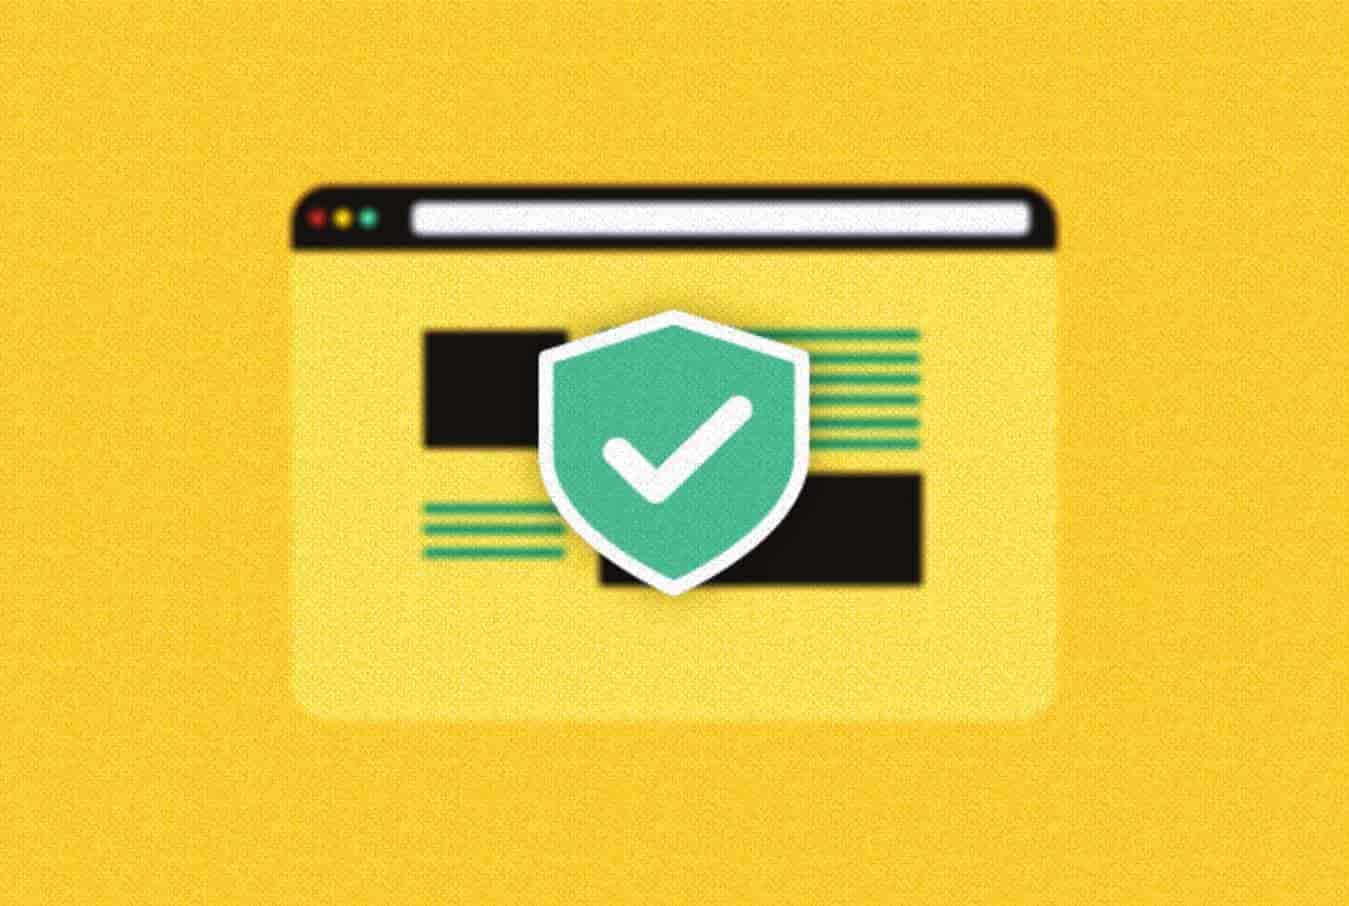 A simple guide to keeping customers safe on your website